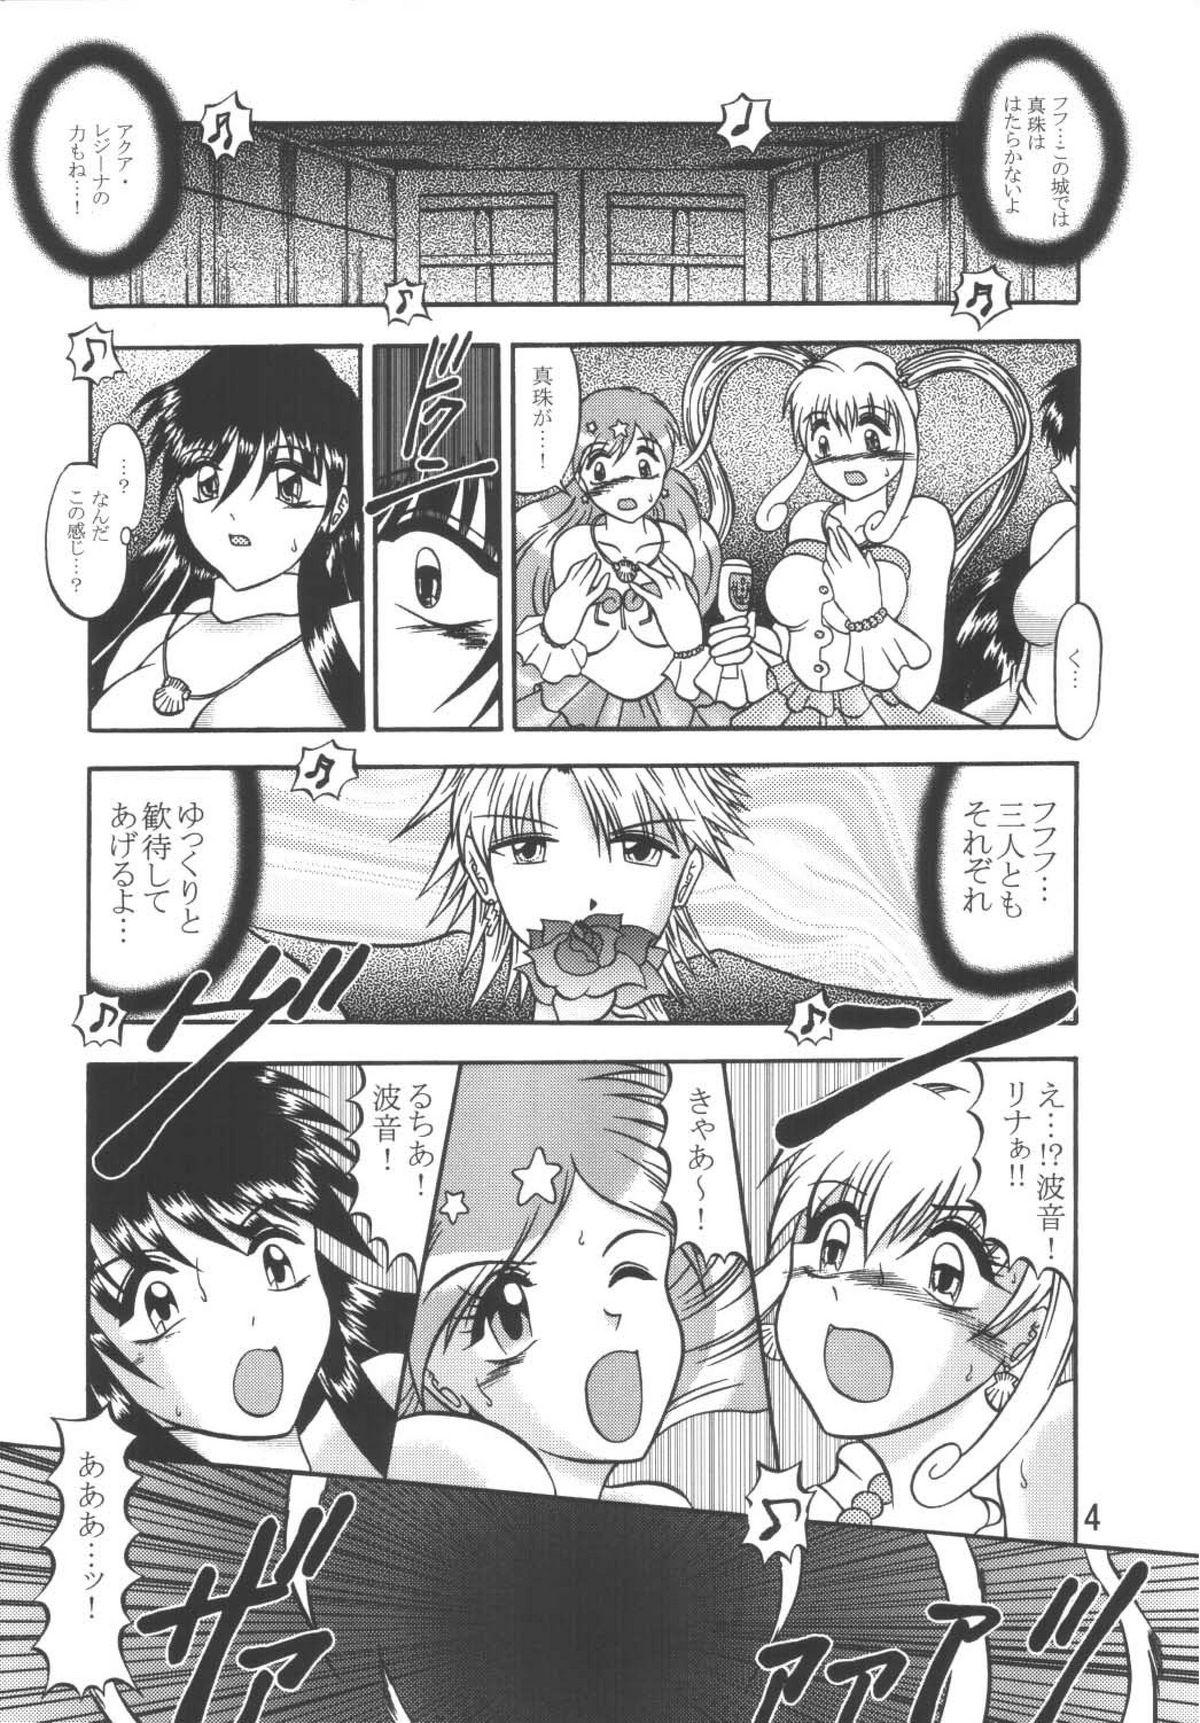 Gay Outinpublic VOICE in the DARK - Mermaid melody pichi pichi pitch Hardcore Free Porn - Page 4